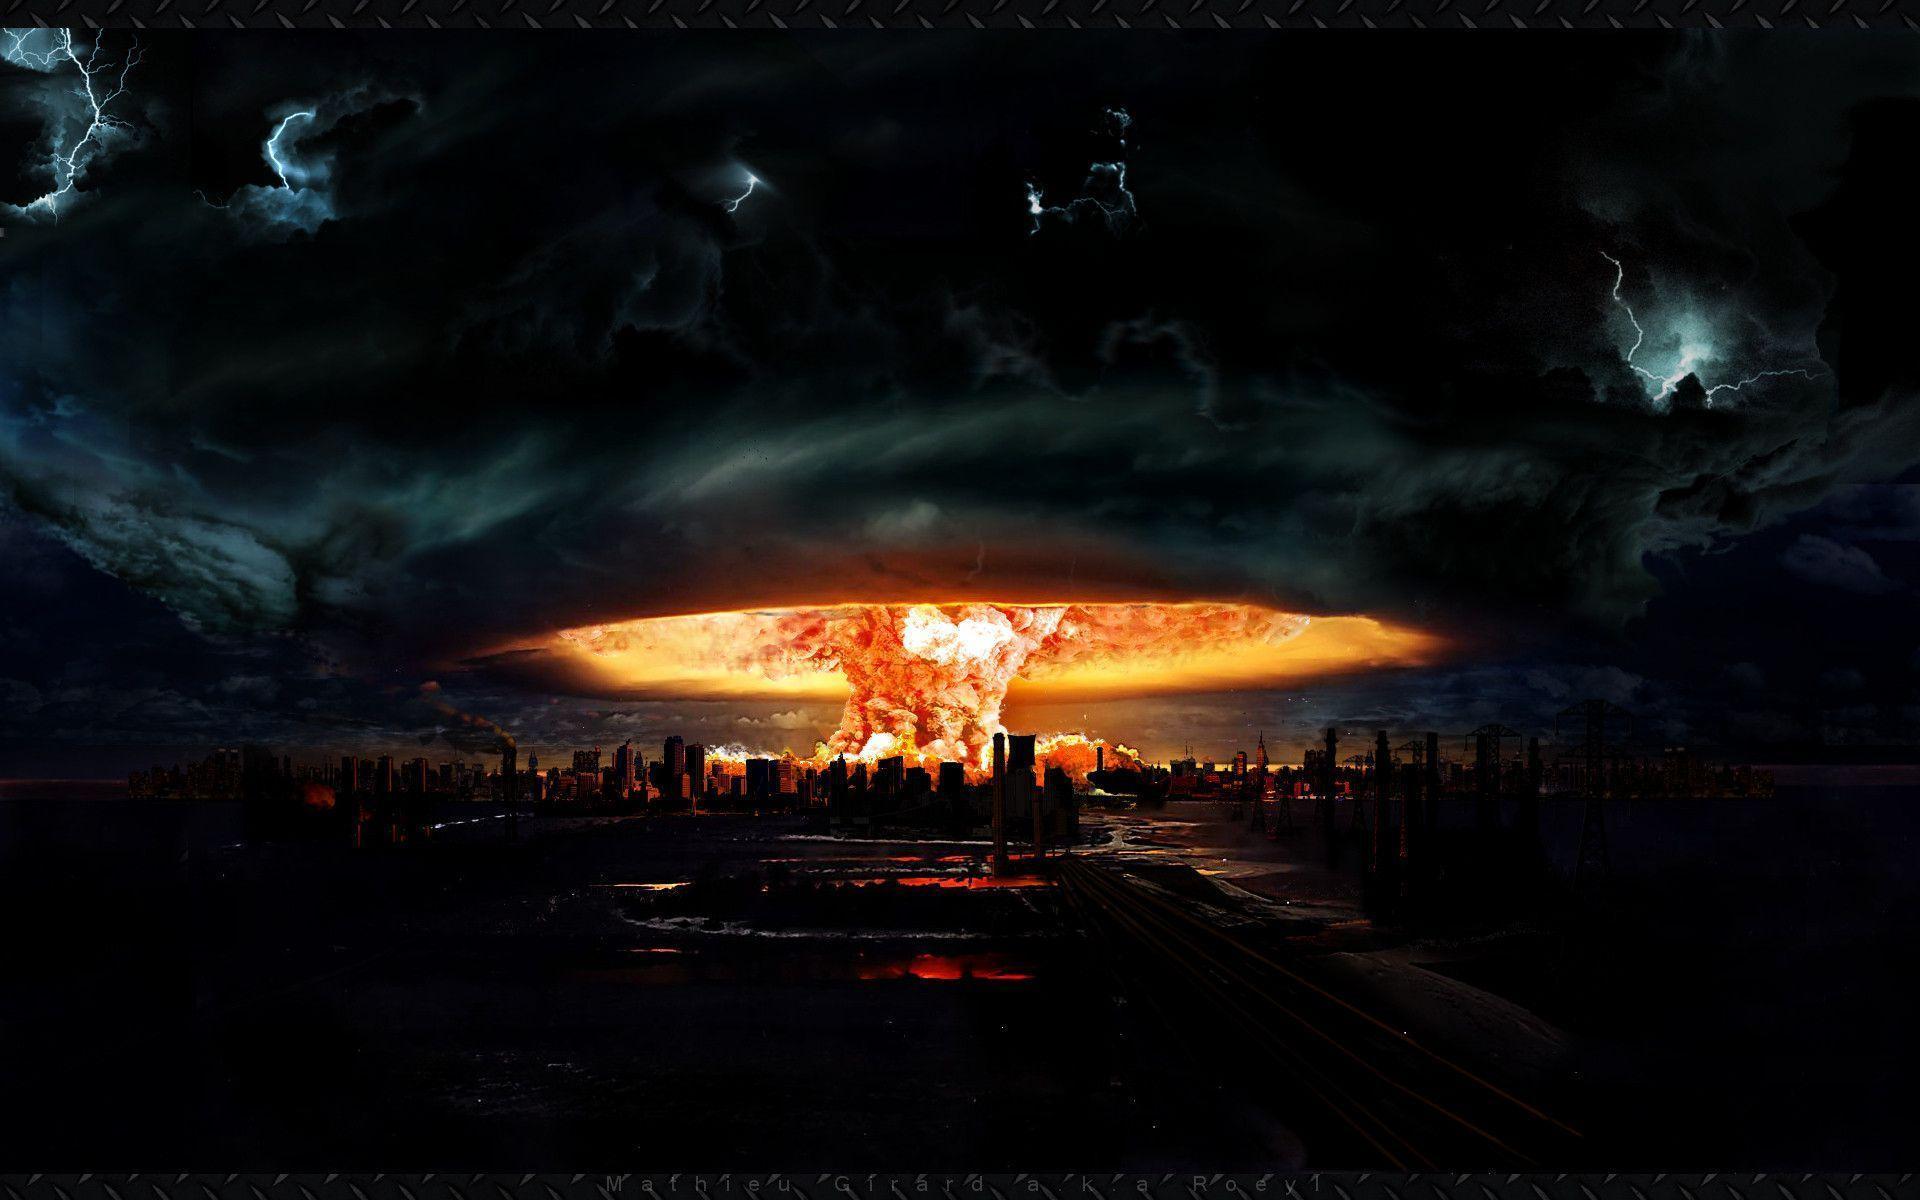 Awesome black themed Apocalypse 2012 wallpaper Design